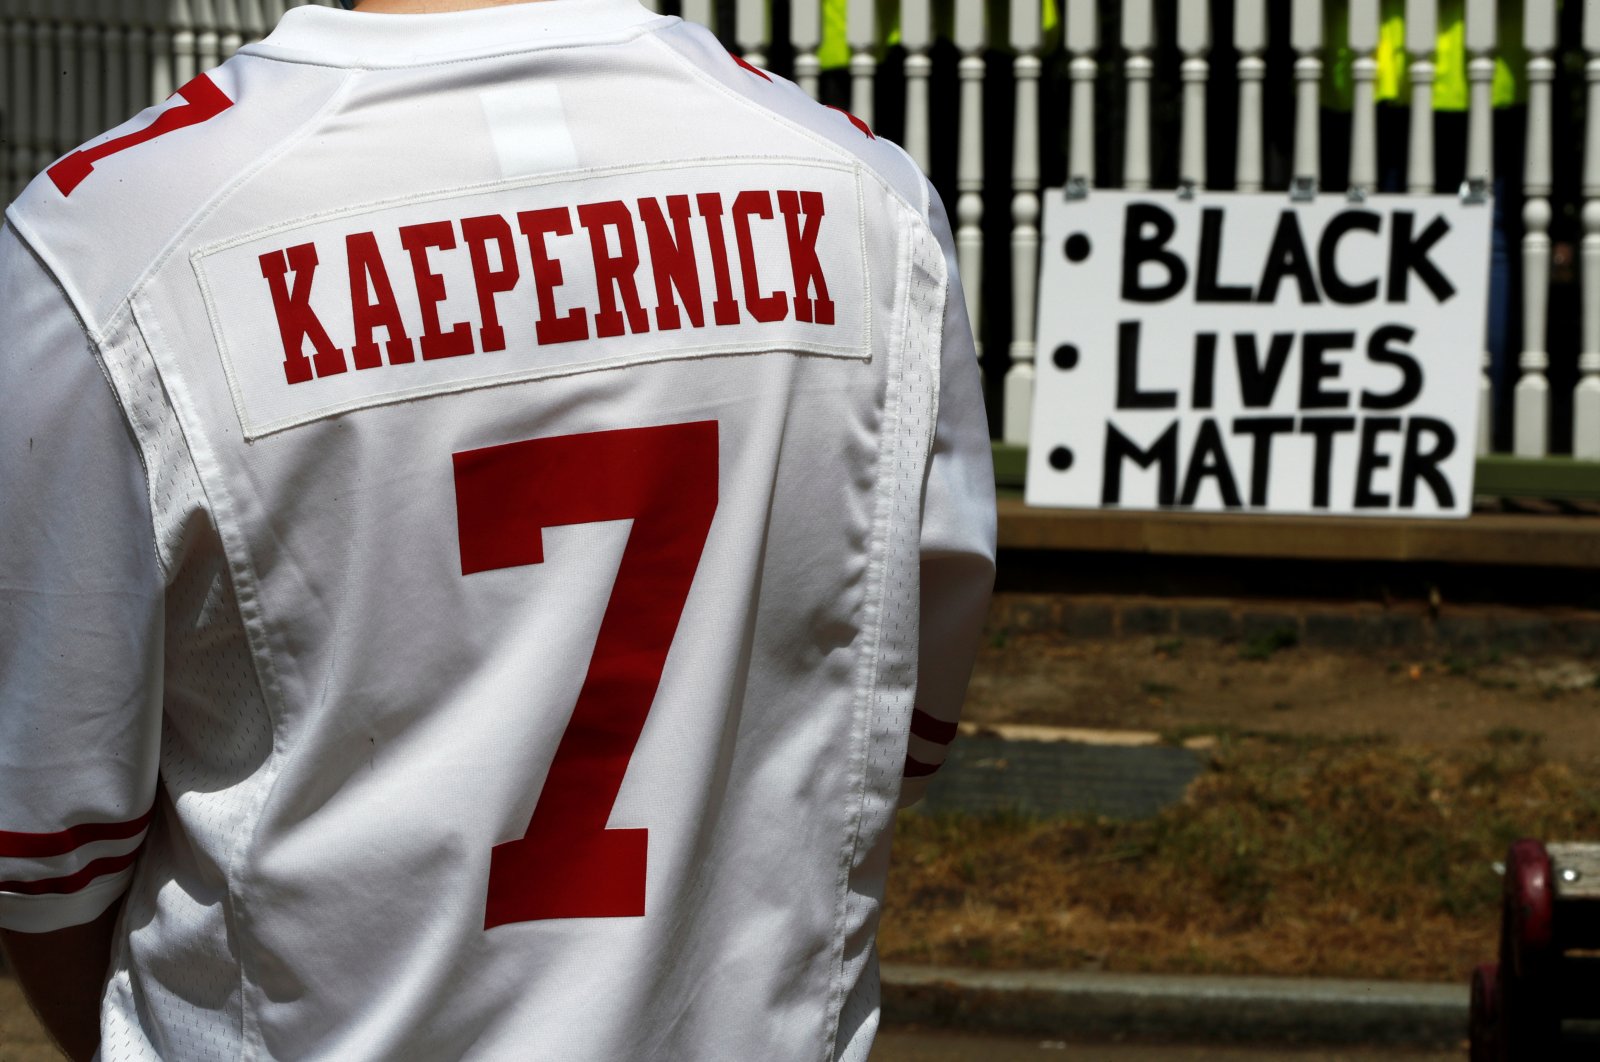 A man wears a jersey of former NFL quarterback Colin Kaepernick ahead of a Black Lives Matter protest in Forbury Gardens in Reading, Britain, June 13, 2020. (Reuters Photo)